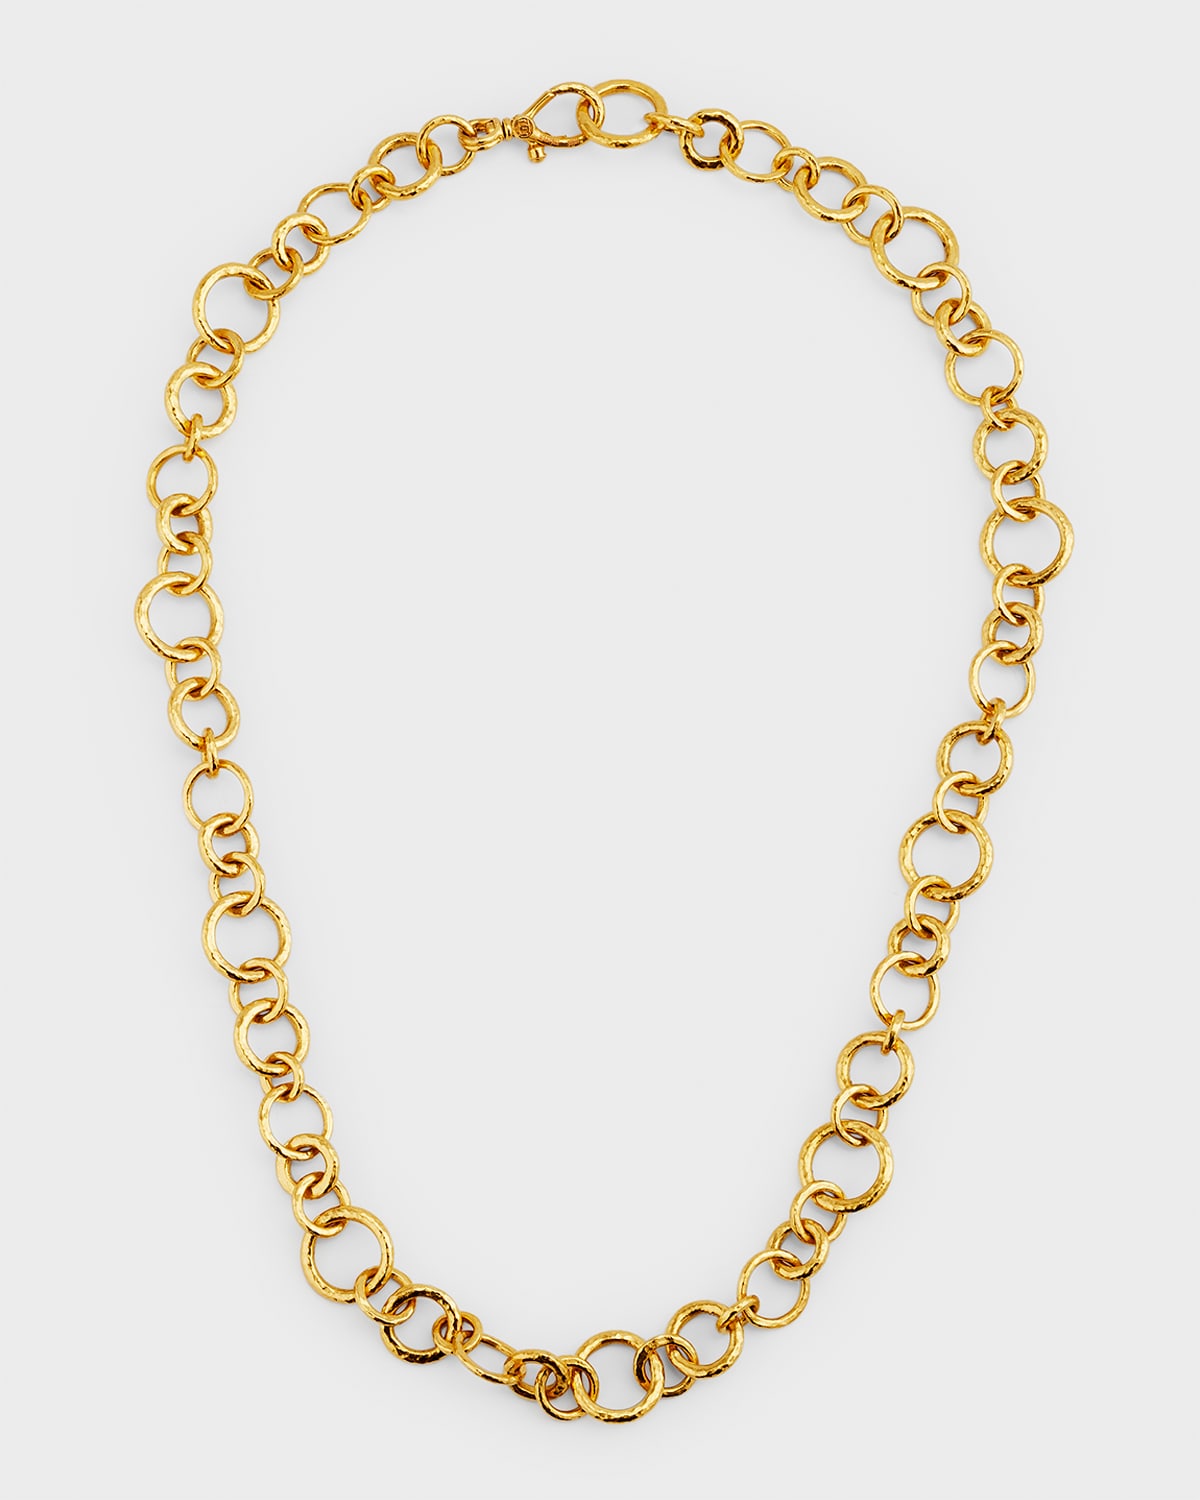 24K Yellow Gold Hoopla Link Necklace